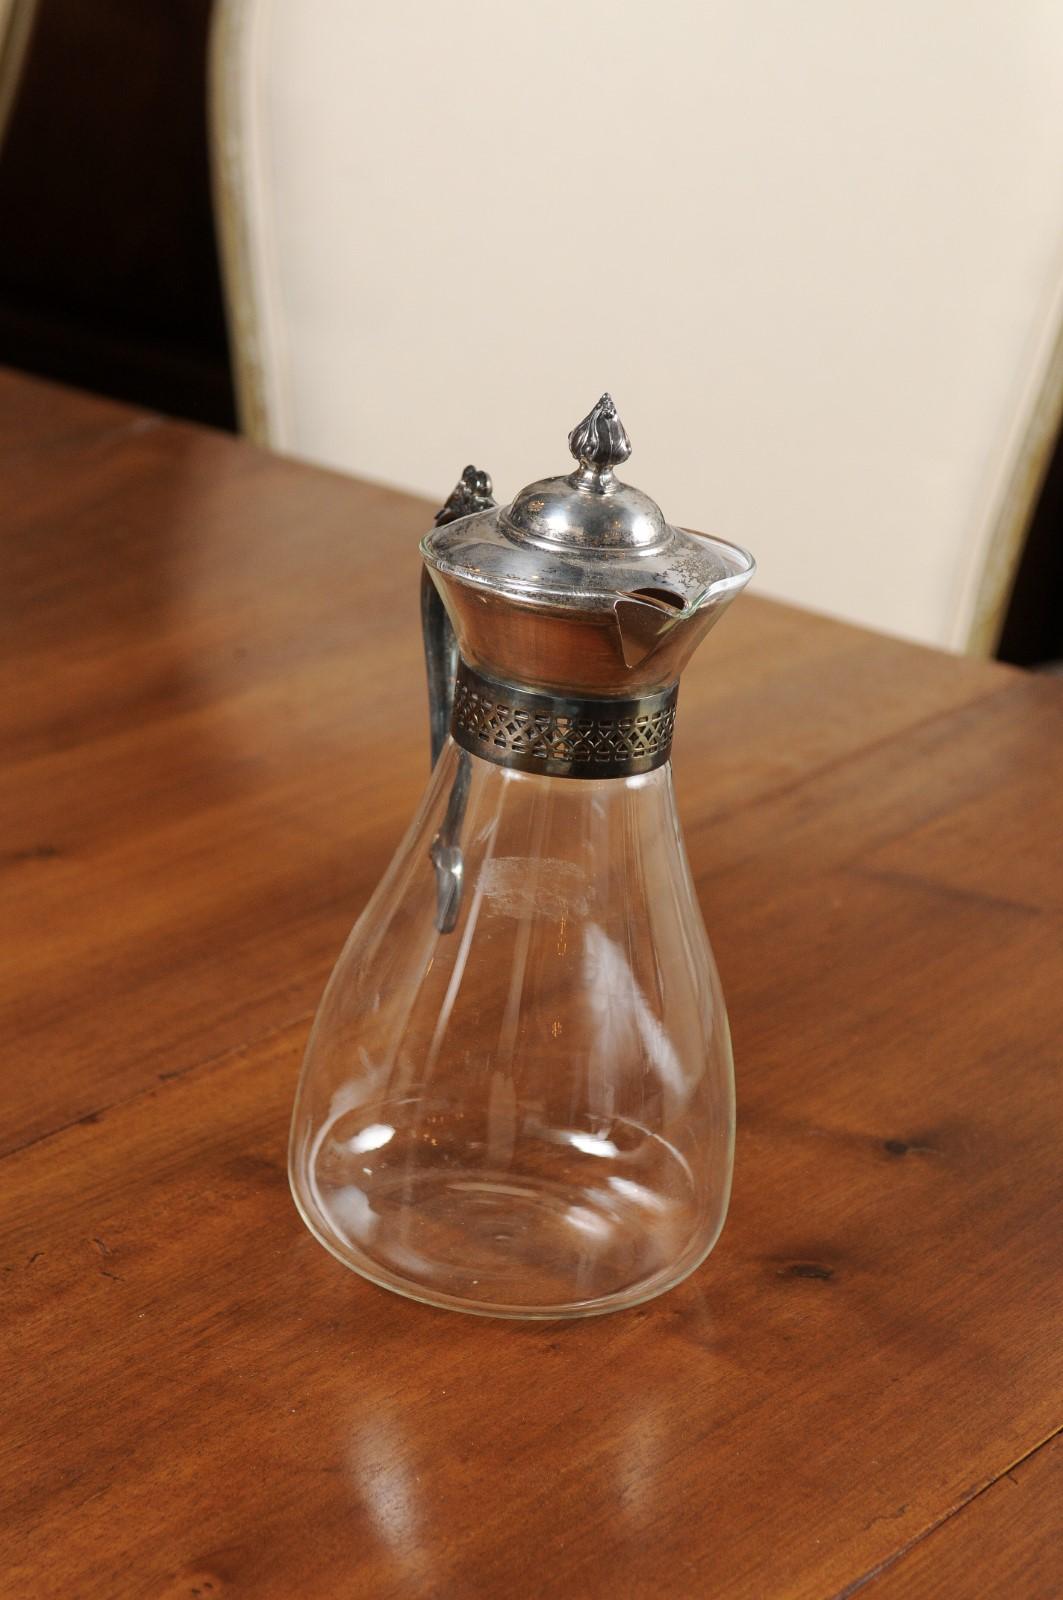 An English glass decanter from the 20th century, with silver accents. Created in England during the 20th century, this decanter features a glass body topped with a silver lid and back handle. Adorned with a flaming finial, latticed effects on the